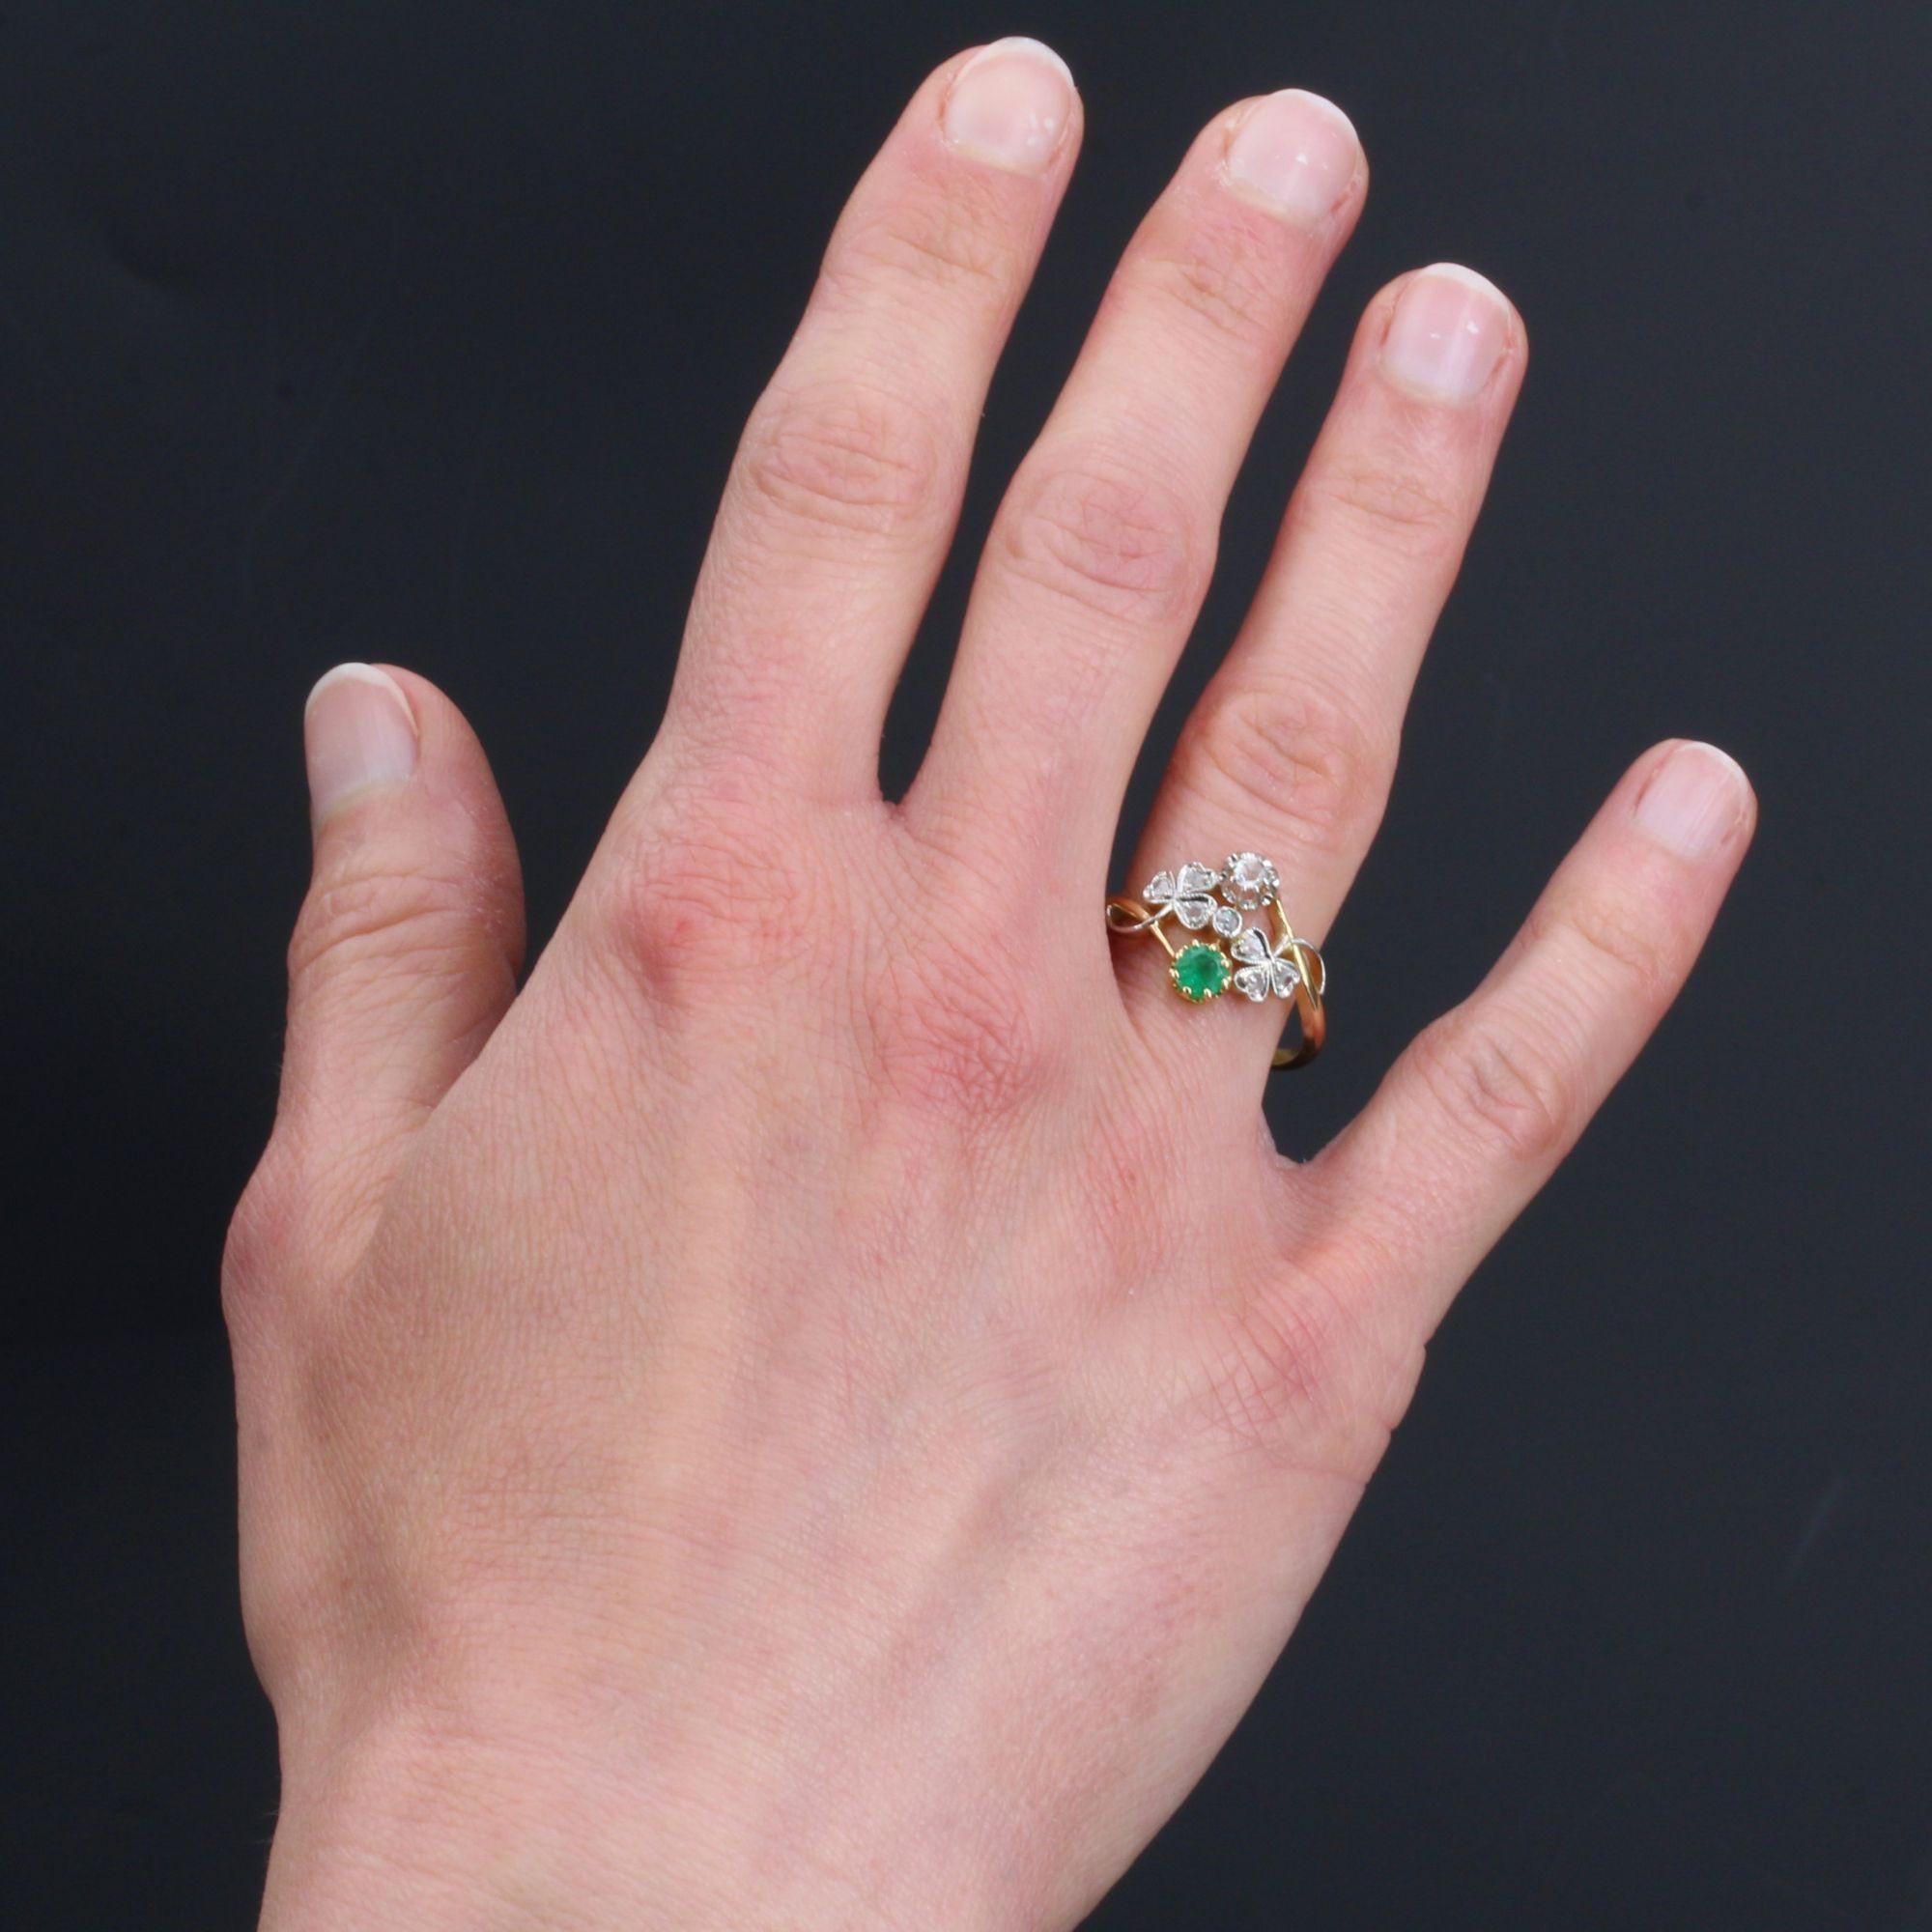 Ring in 18 karat yellow gold, horse head hallmark.
Charming antique ring, it is decorated on the top with an emerald and a rose-cut diamond, connected by another rose-cut diamond. On both sides, the start of the ring is made of small clovers whose